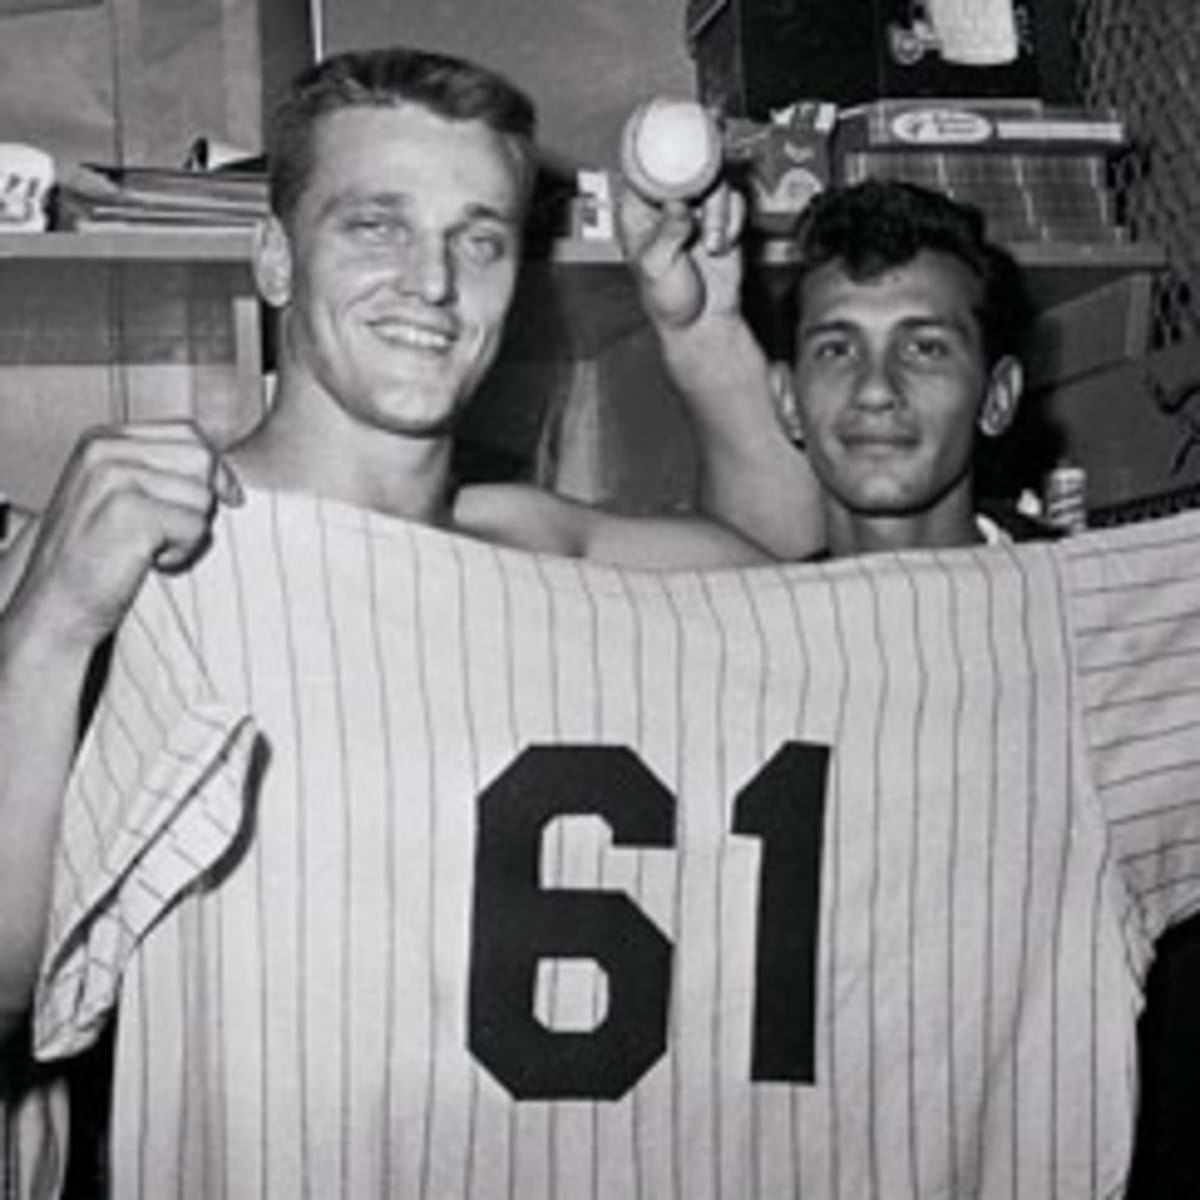 Richard Rothschild: Looking back on Roger Maris' record-breaking home run  50 years later - Sports Illustrated